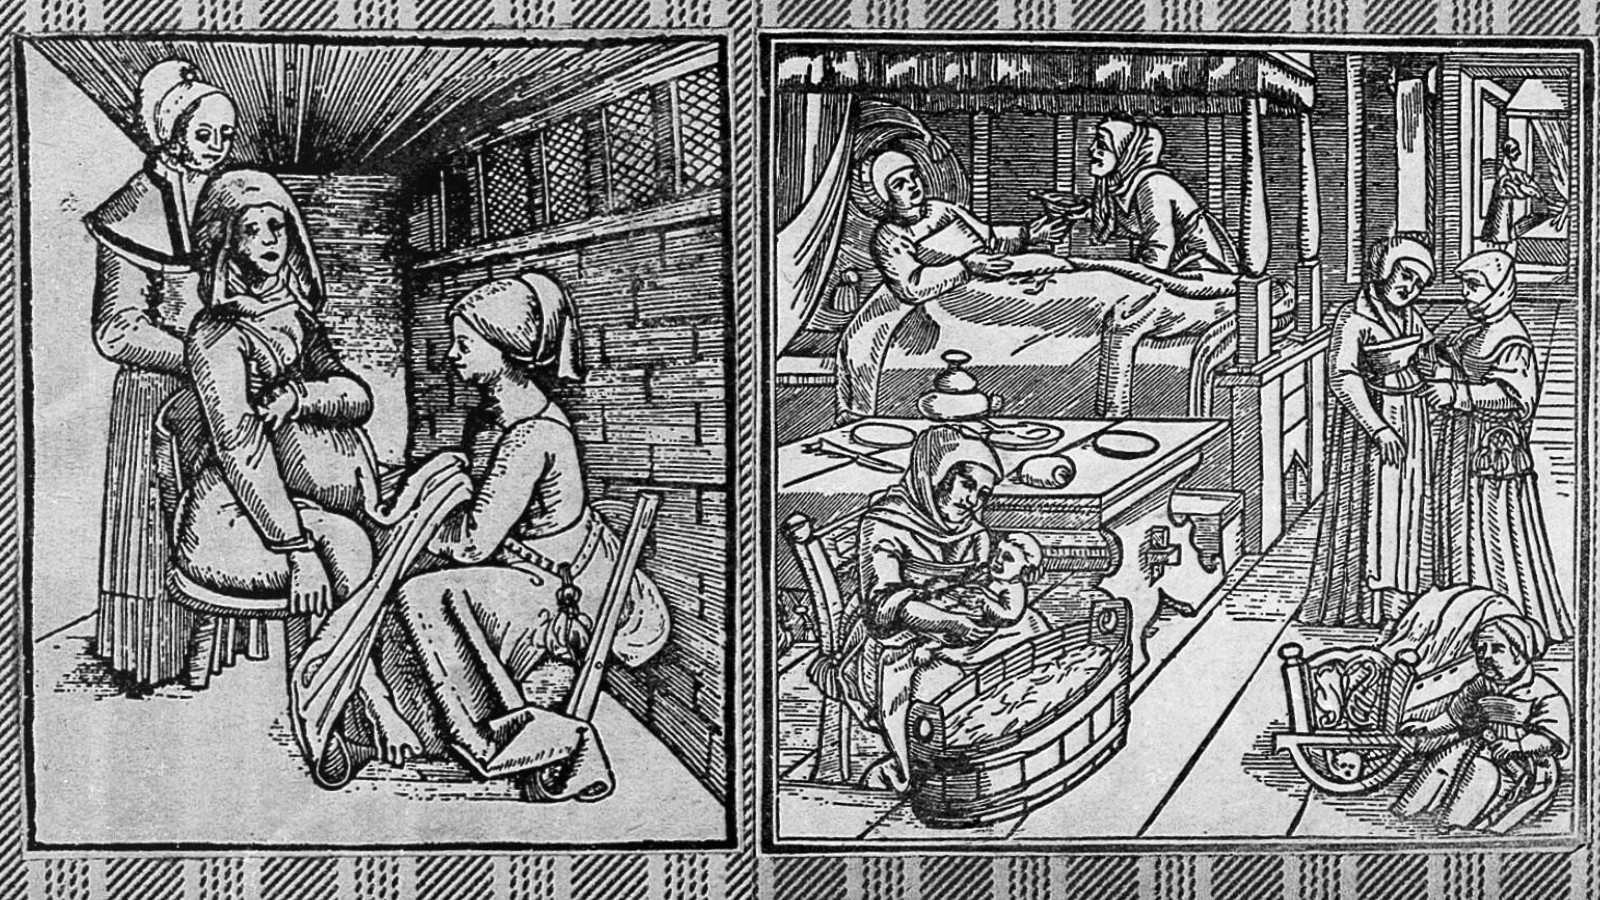 Obstetrics: midwife assisting in a birth, Original woodcut image from E. Roeslin, Rosengarten, 1513,Wellcome Collection